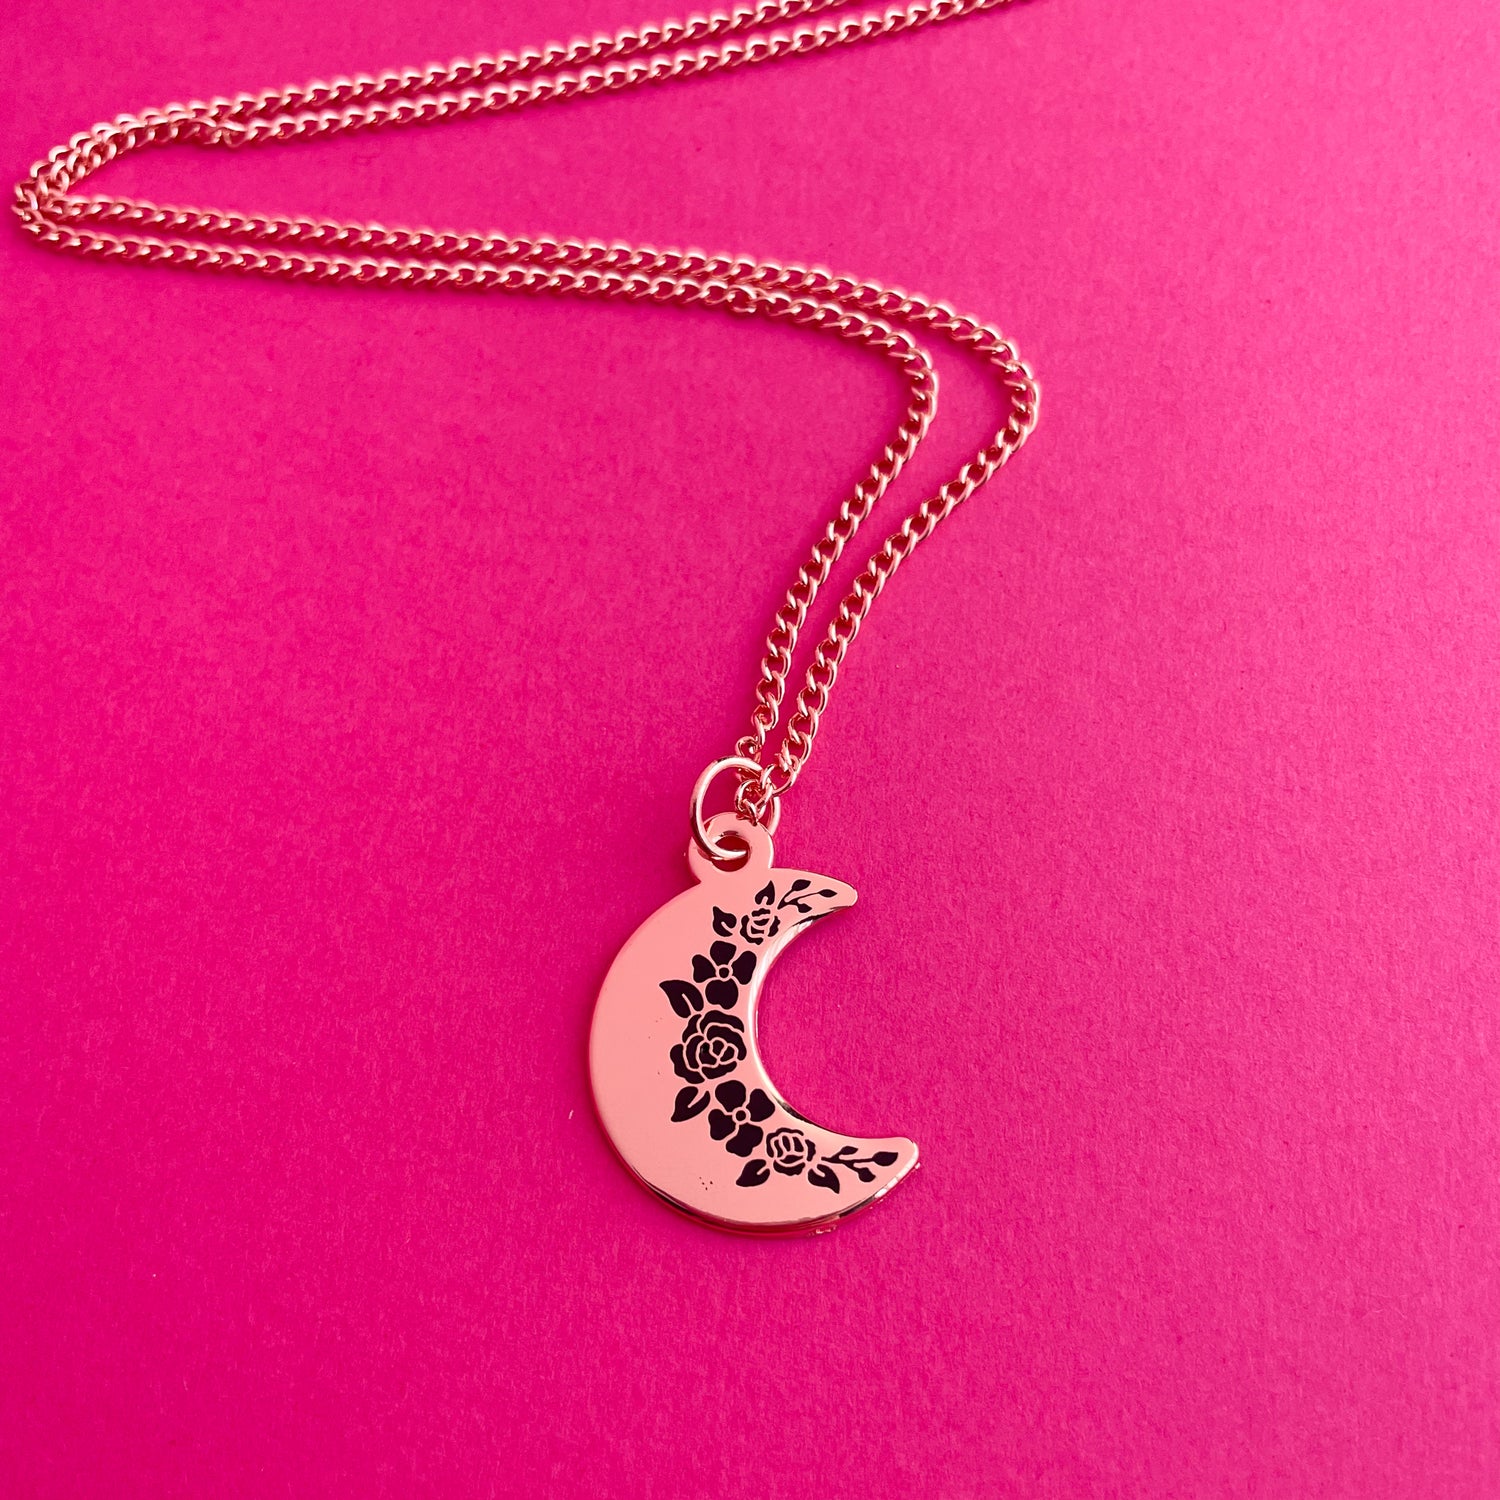 A crescent moon pendanct with black floral silhouettes along the inside edge. It has a copper colored chain. It is on a hot pink background.